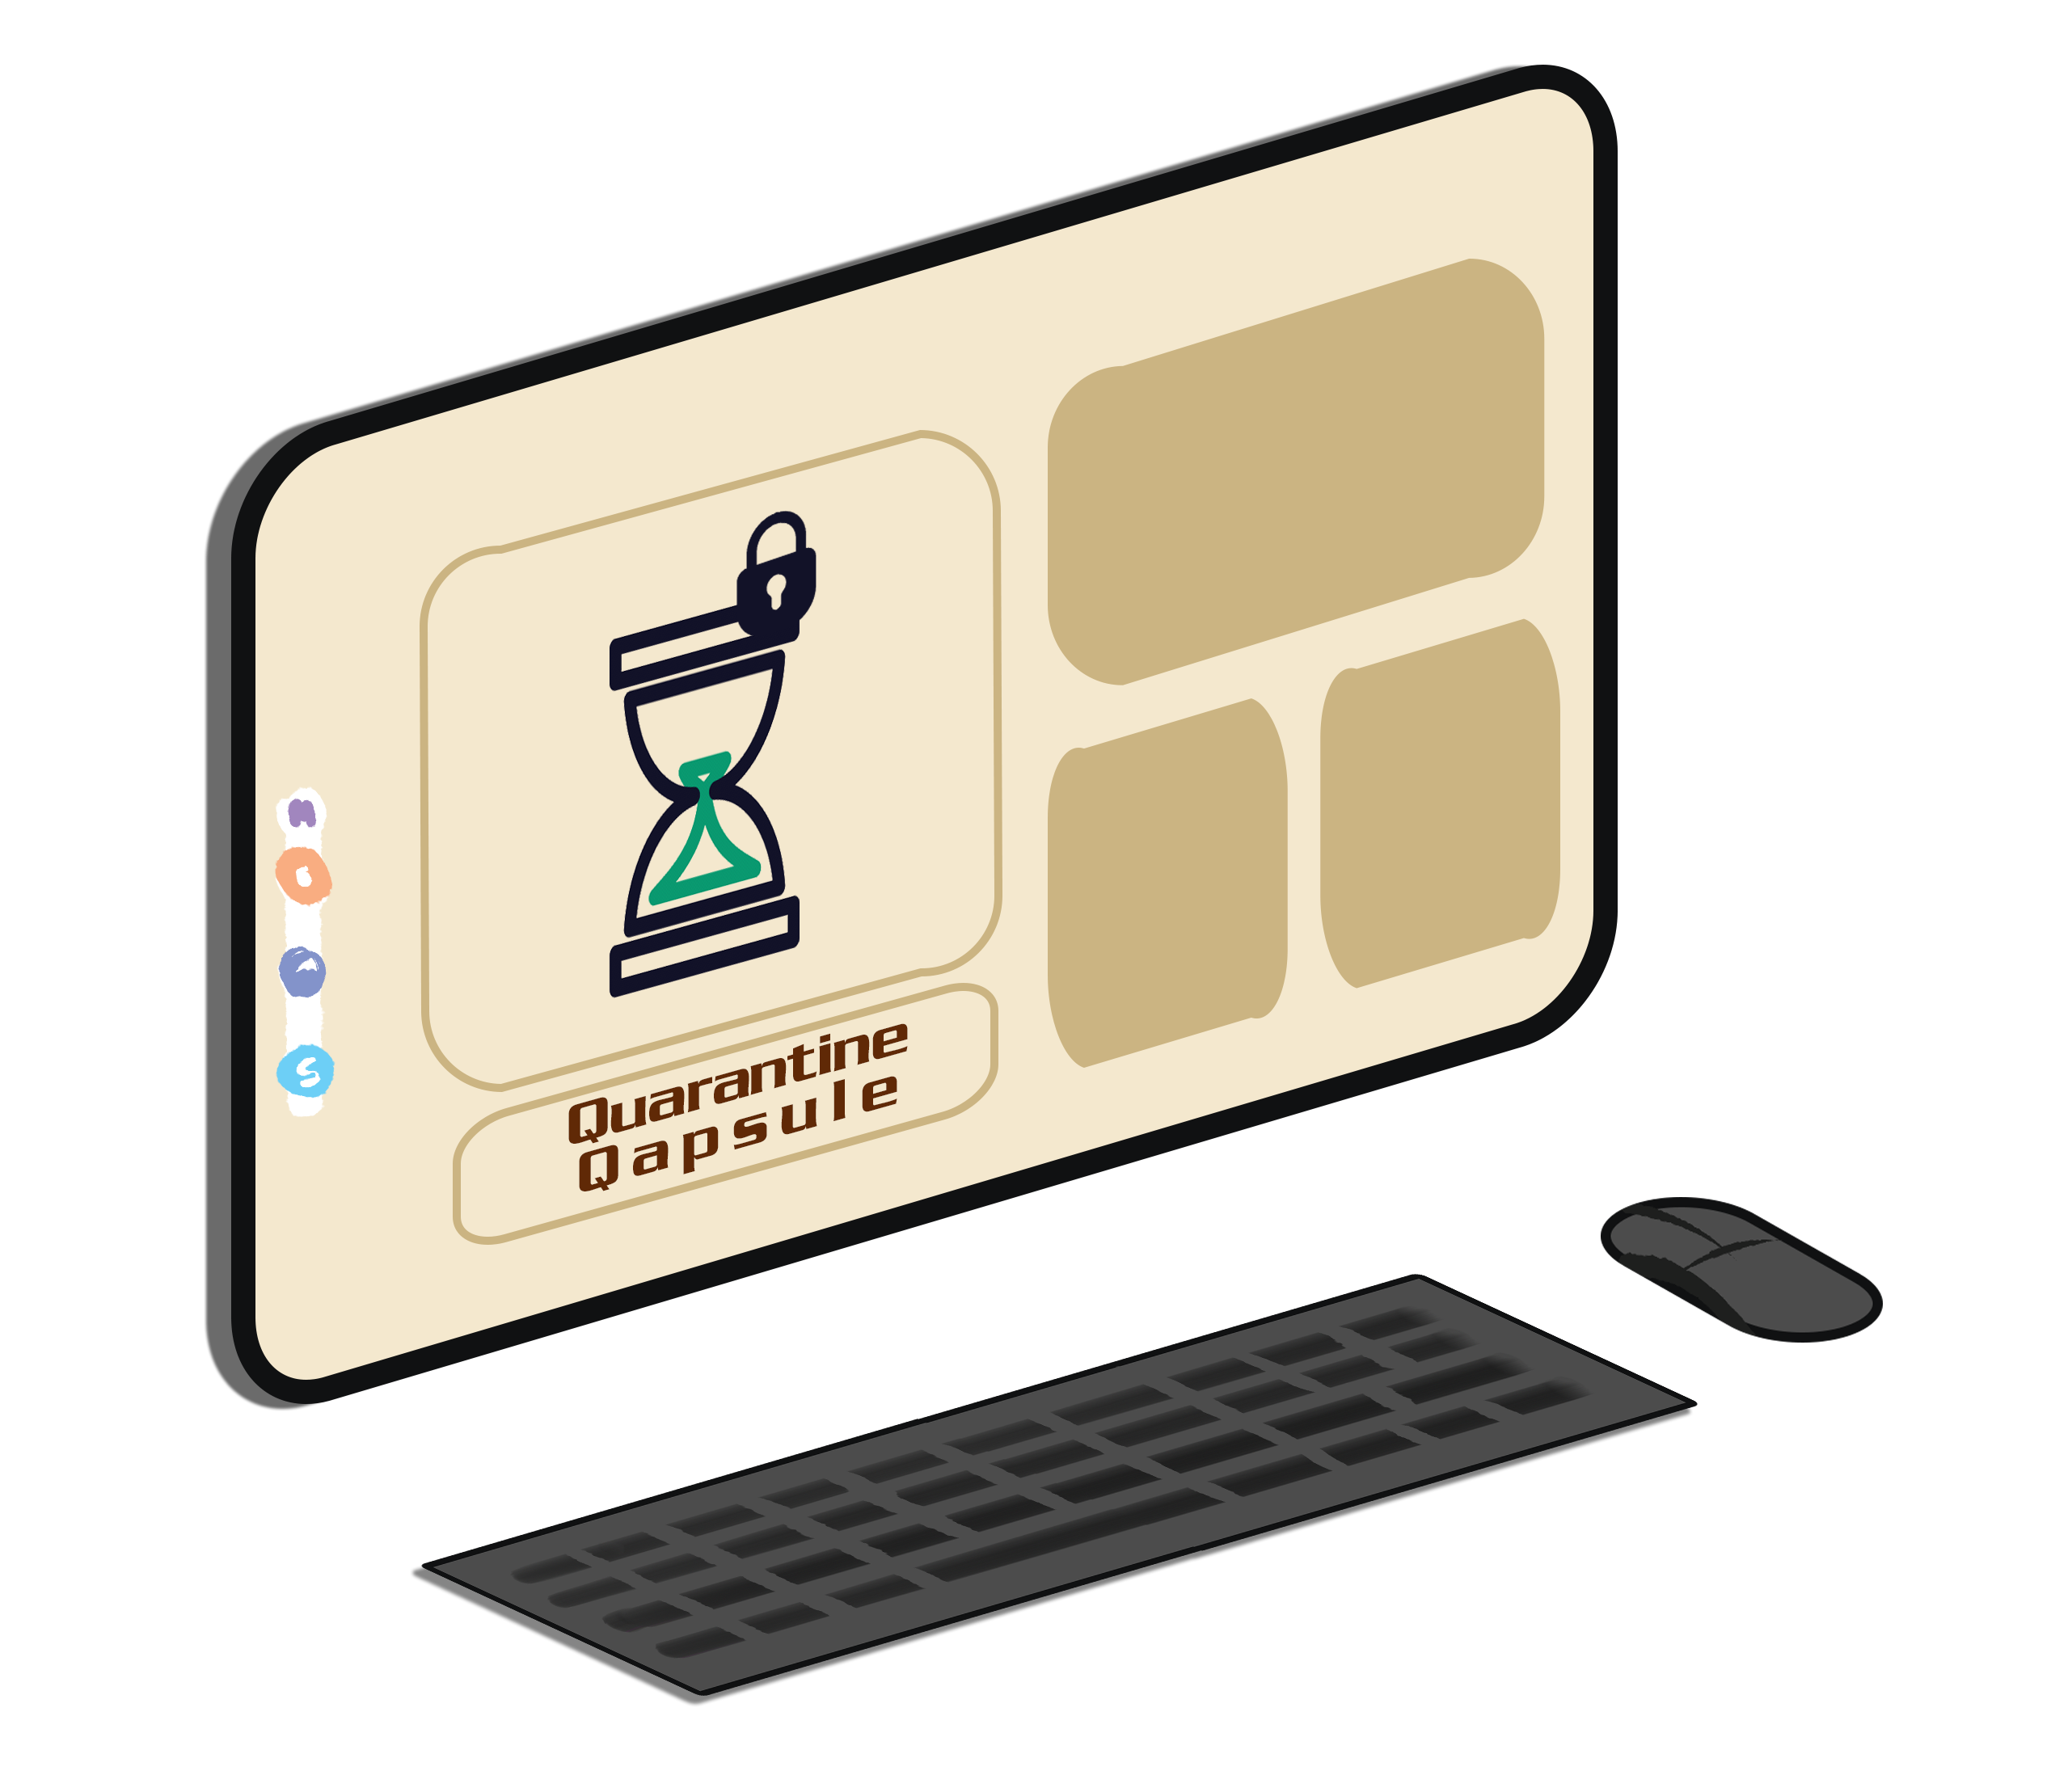 Computer screen with a tan coloured webpage open, graphic of an hourglass on the screen with a lock motif in the corner and “Quarantine Qapsule” text